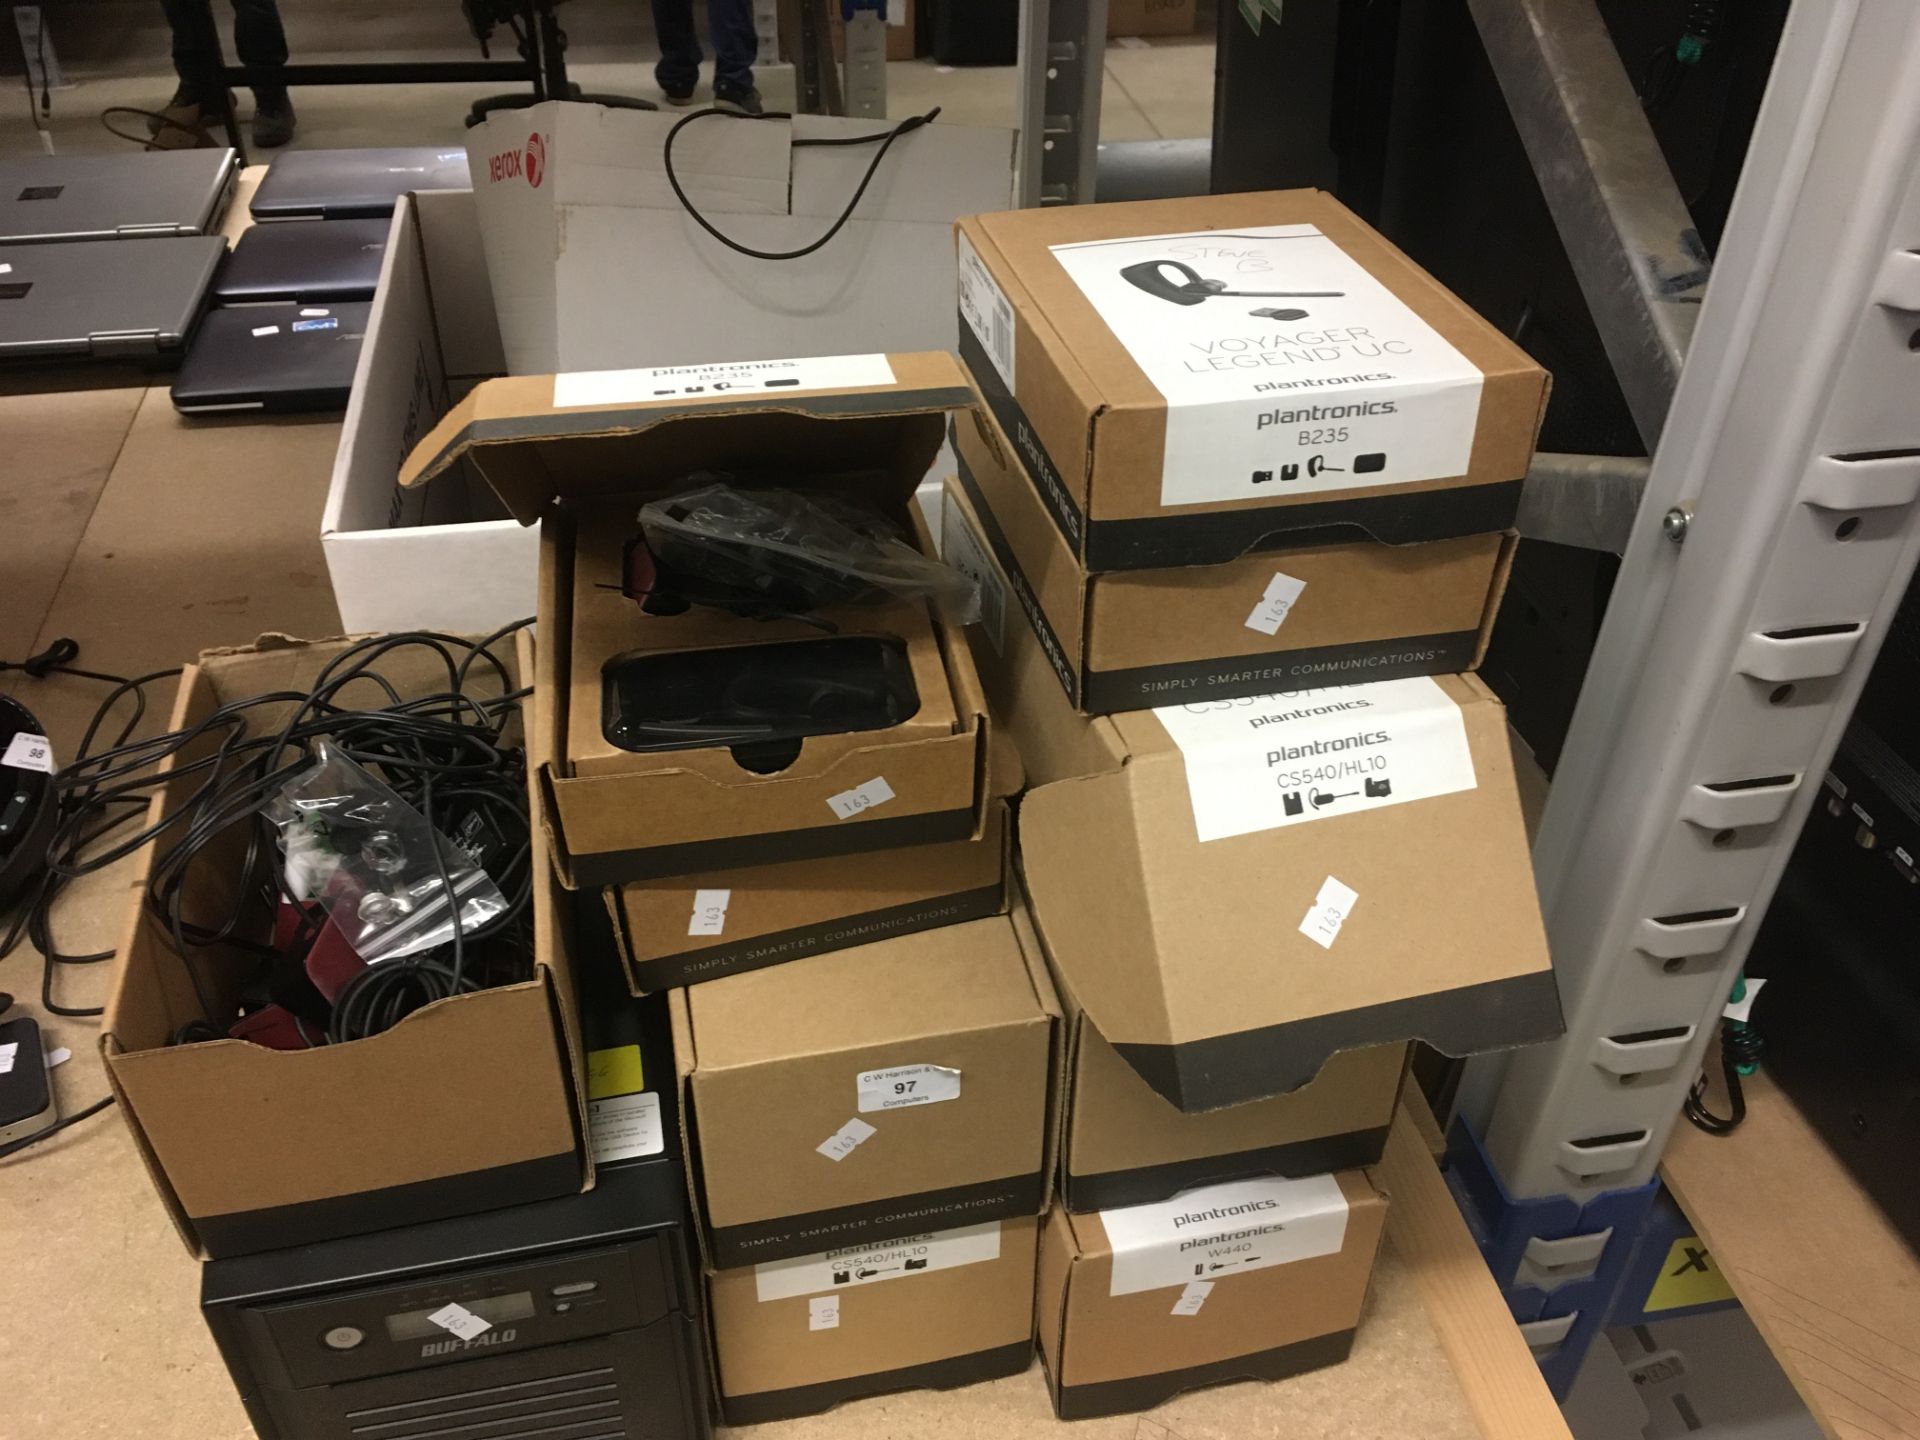 Approximately 50 x Plantronics B235 Voyager bluetooth headsets and a Buffalo terastation server